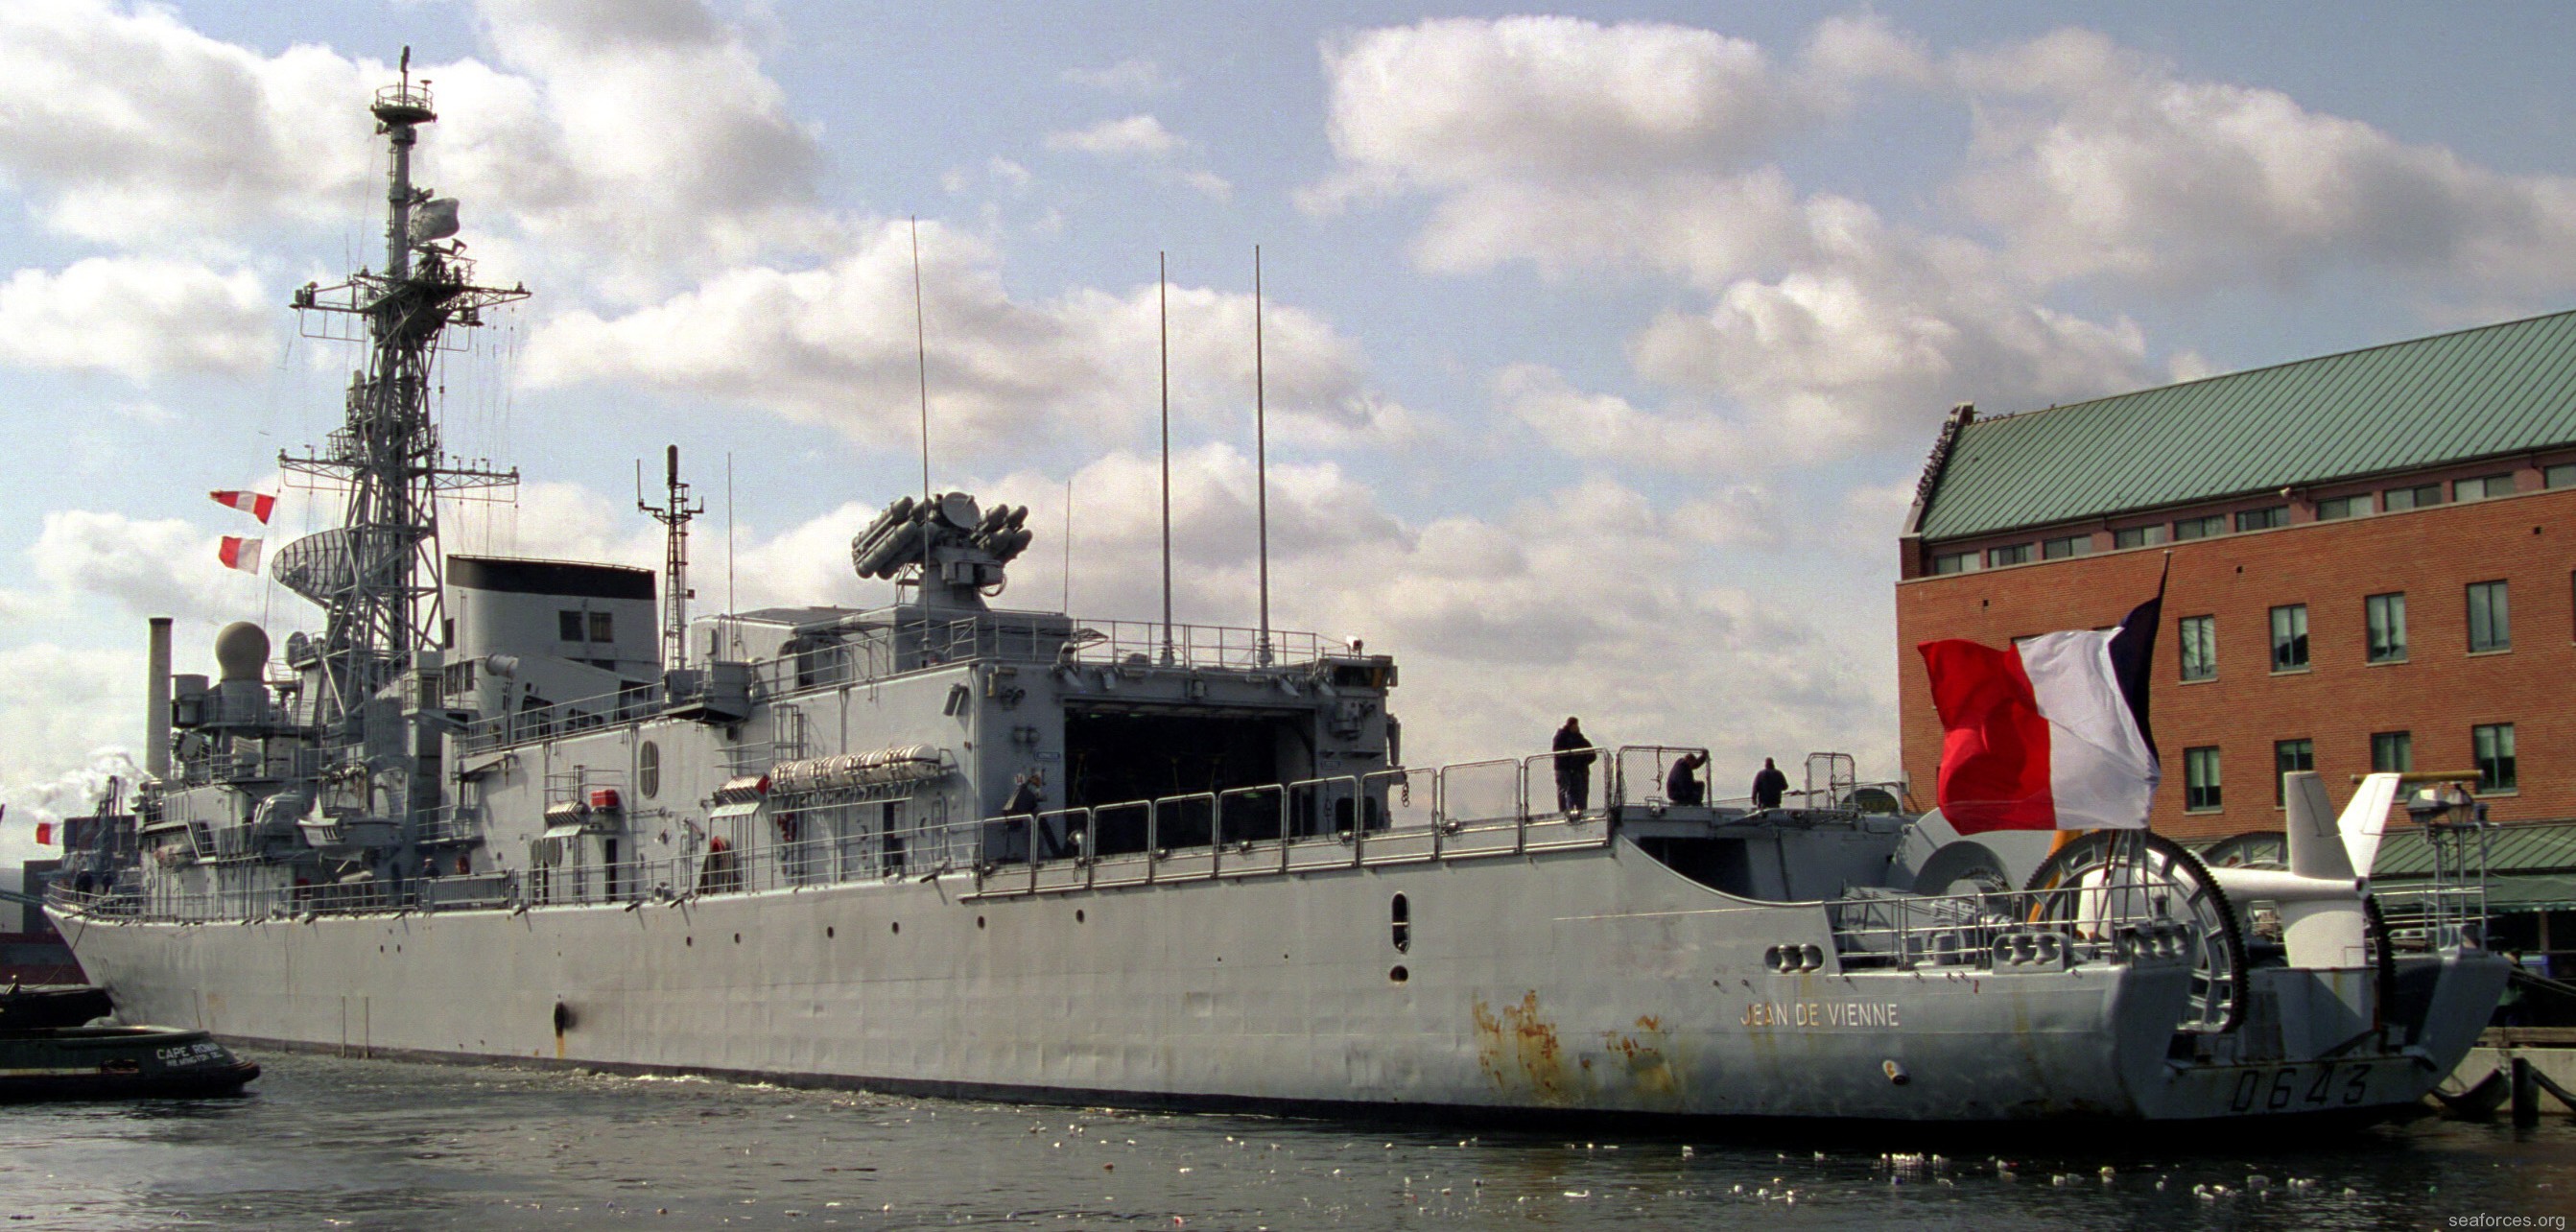 d-643 fs jean de vienne leygues class f70as asw frigate destroyer french navy marine nationale 17